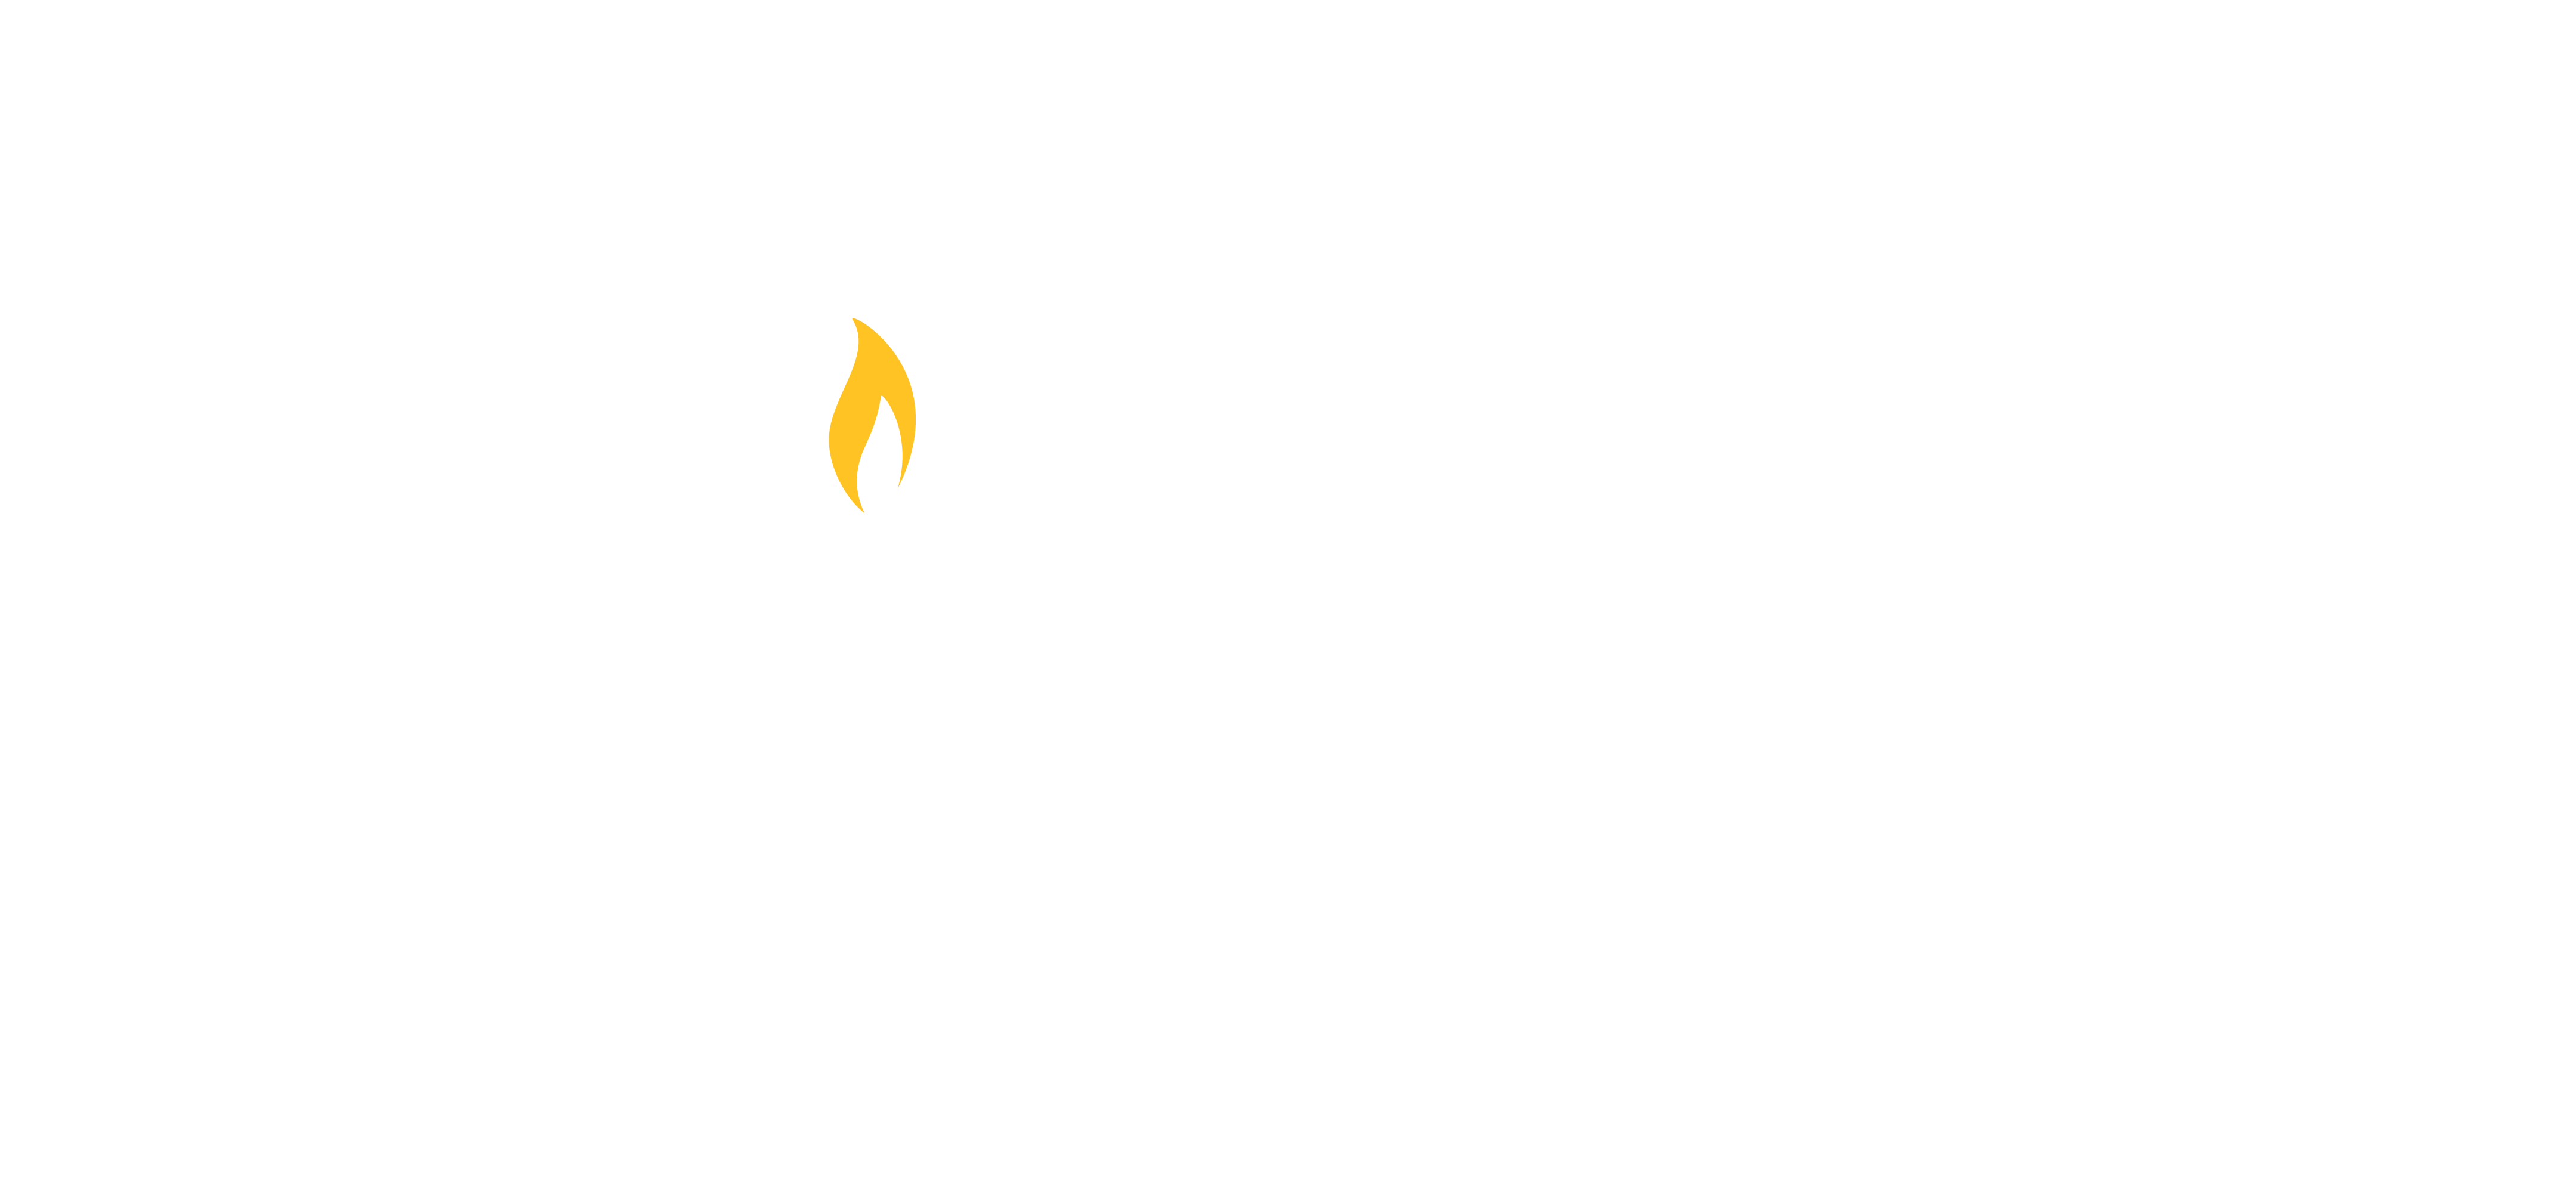 NKU Chase College of Law